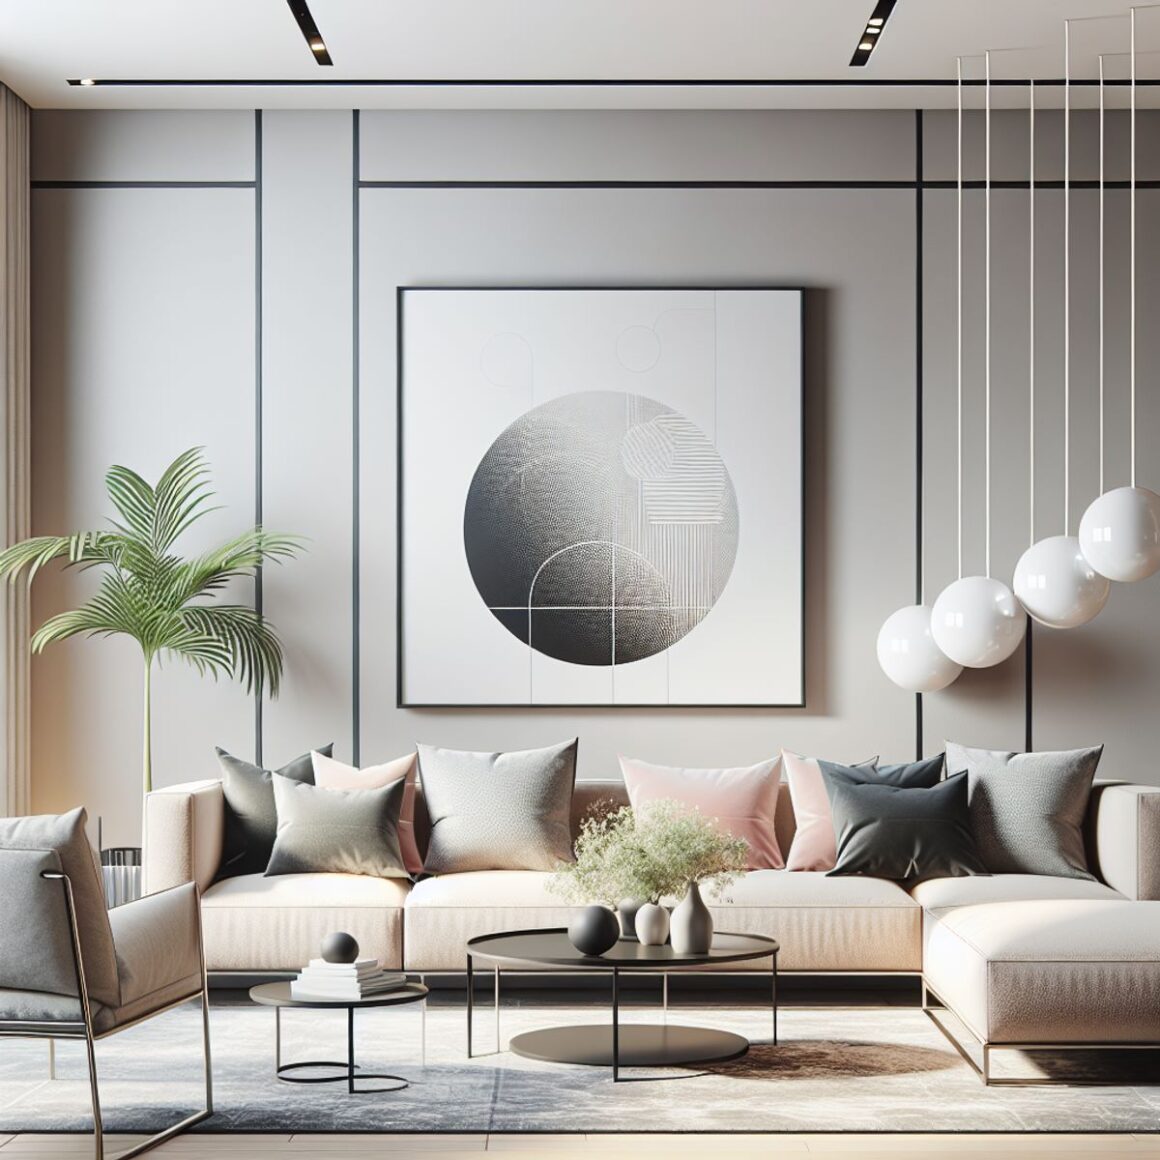 A sleek and modern living room with clean lines, chic furniture, and a minimalist color palette.